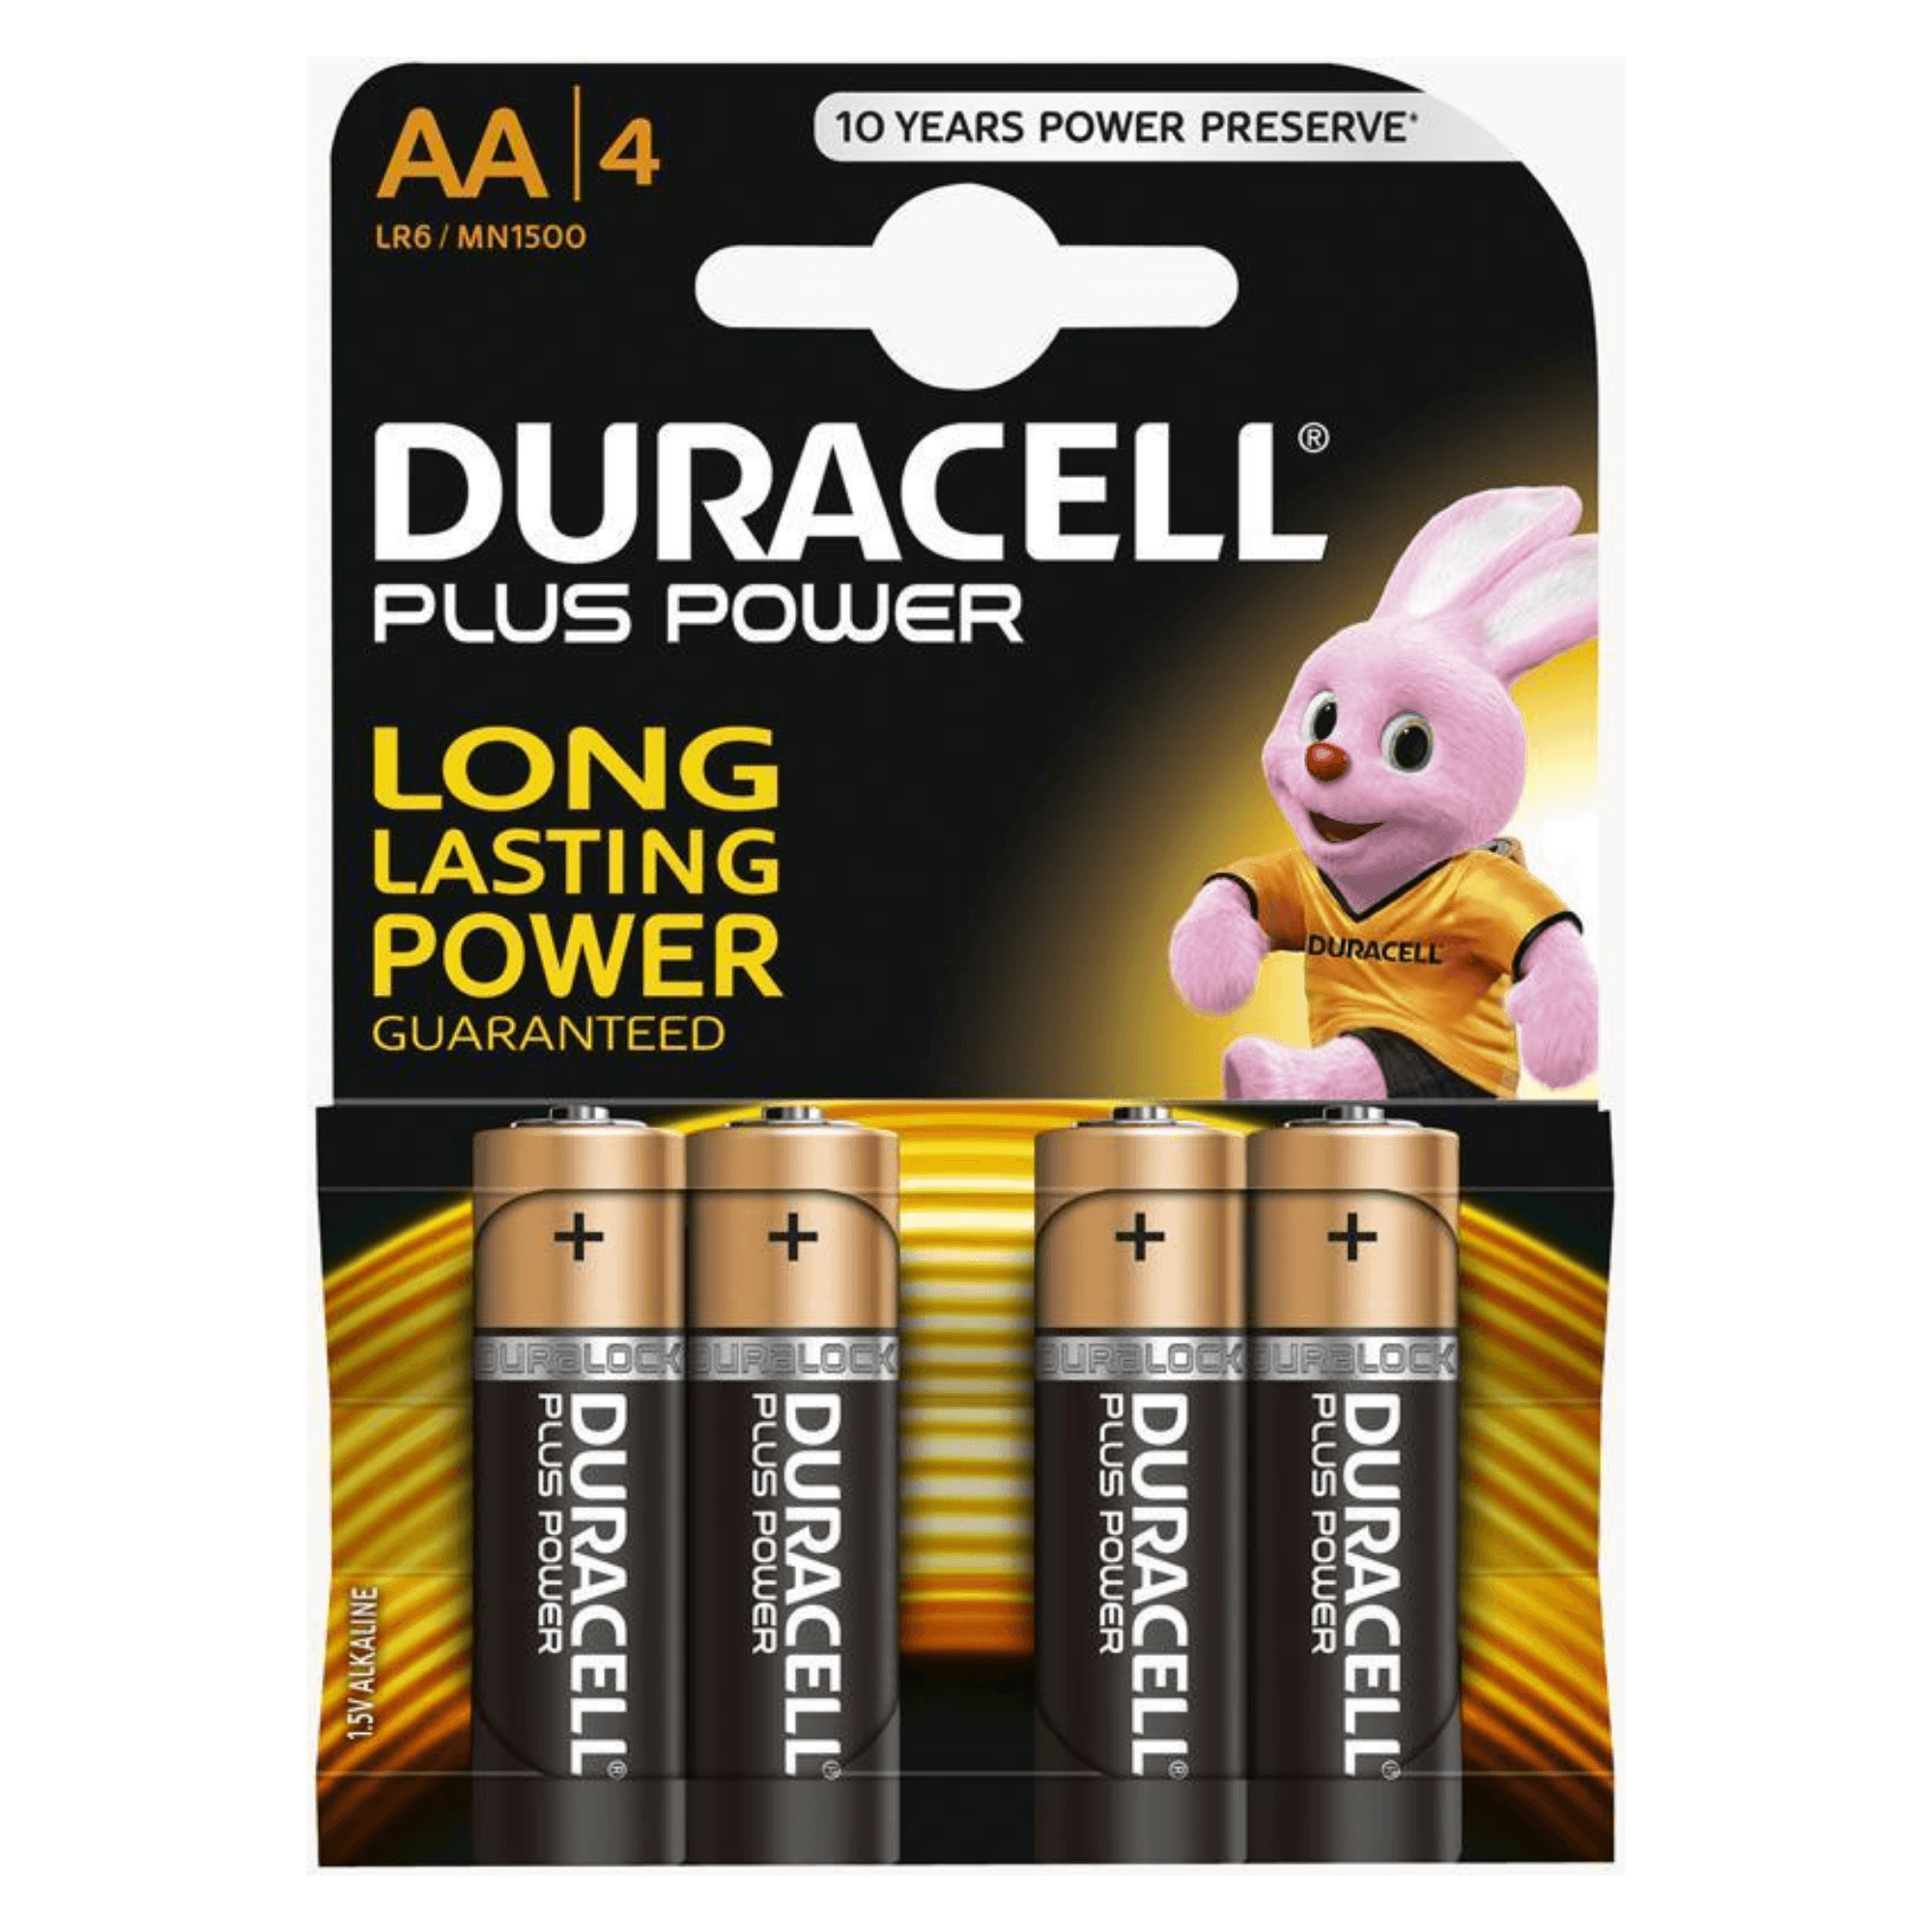 Plus AA (MN1500/LR6) 12 Pack, 12 pieces - Duracell - VitalAbo